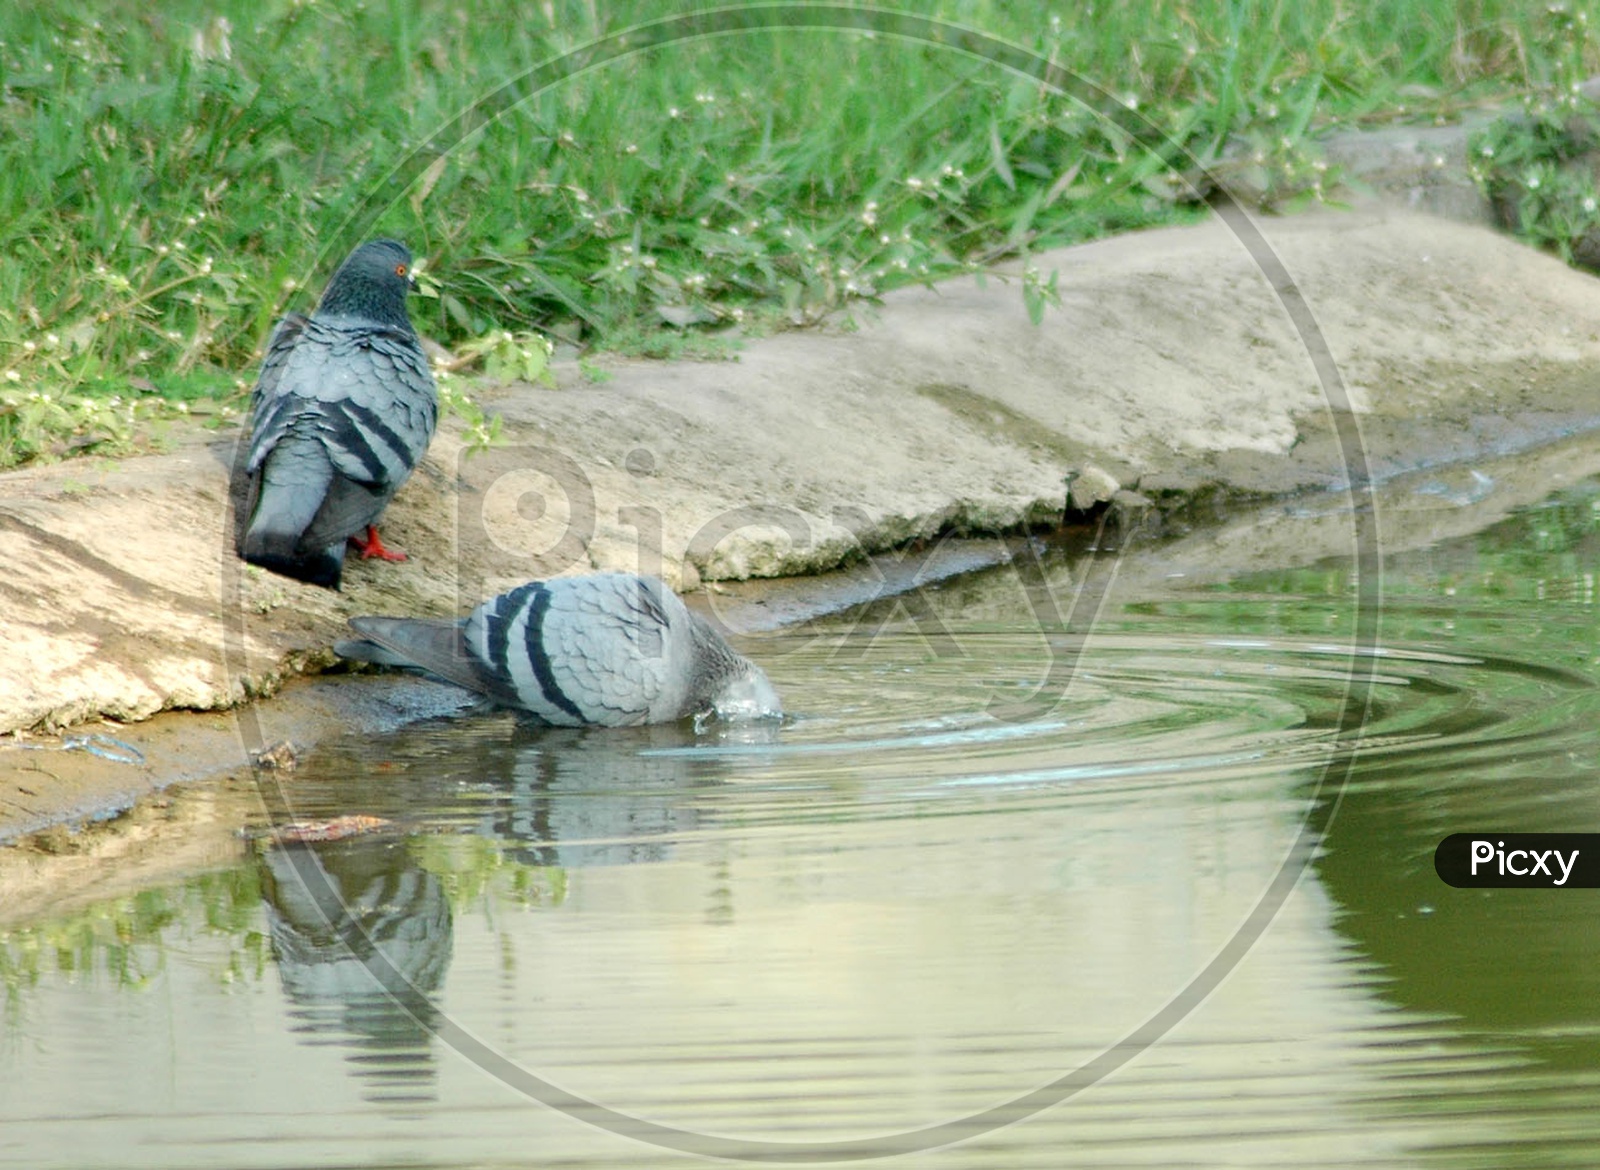 A Pigeon drinking water in the pond